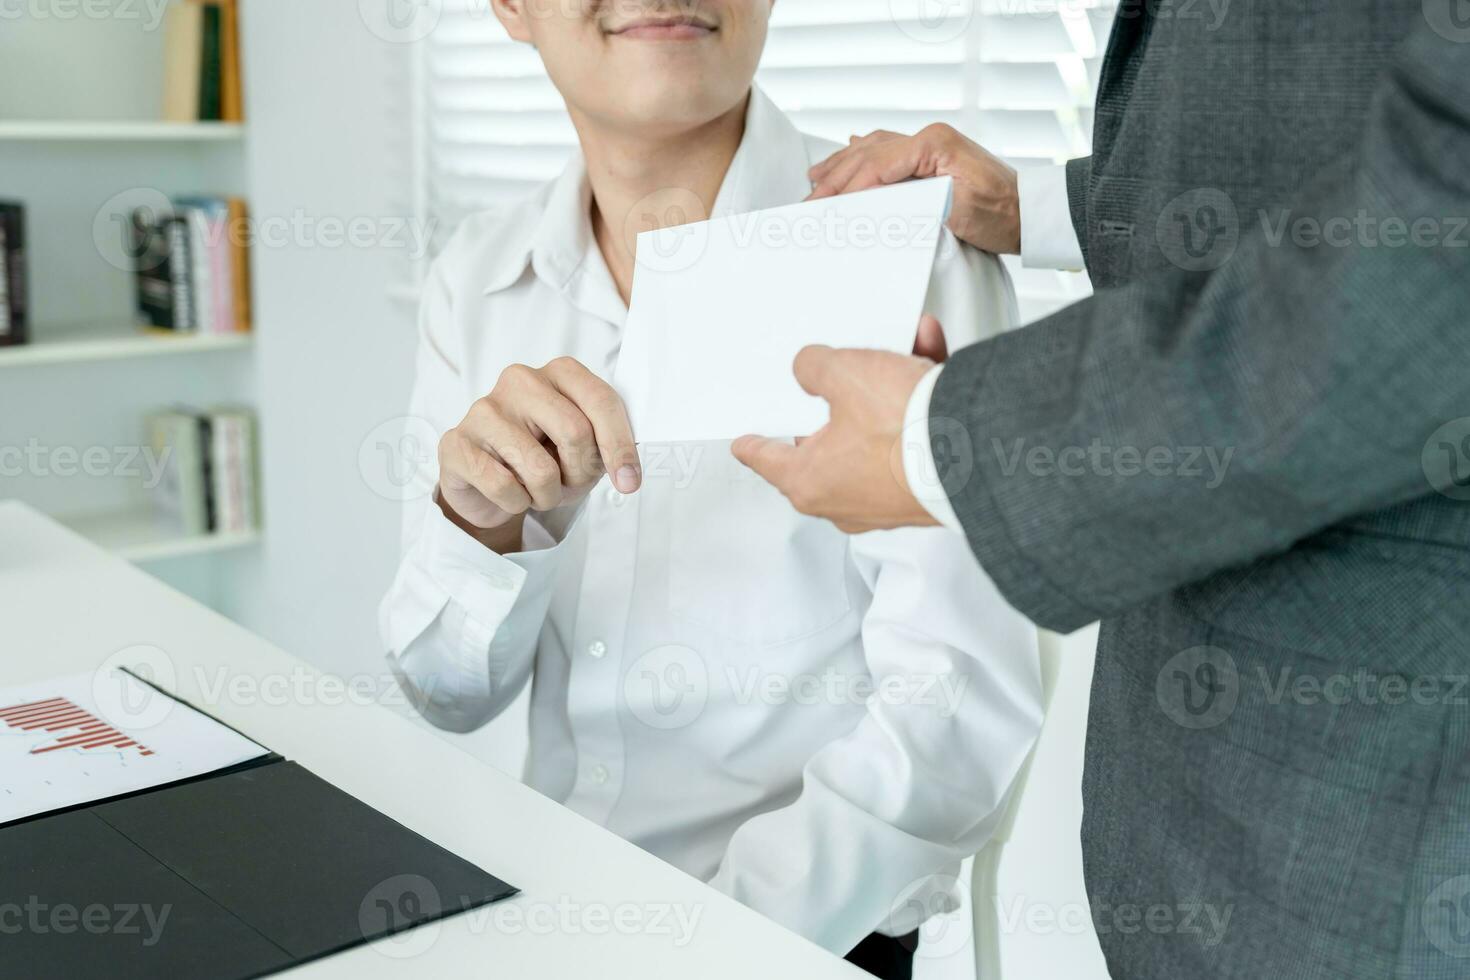 Businessmen receive salary or bonuses from management or Boss. Company give rewards to encourage work. Smiling businessman enjoying a reward at the desk in the offic photo